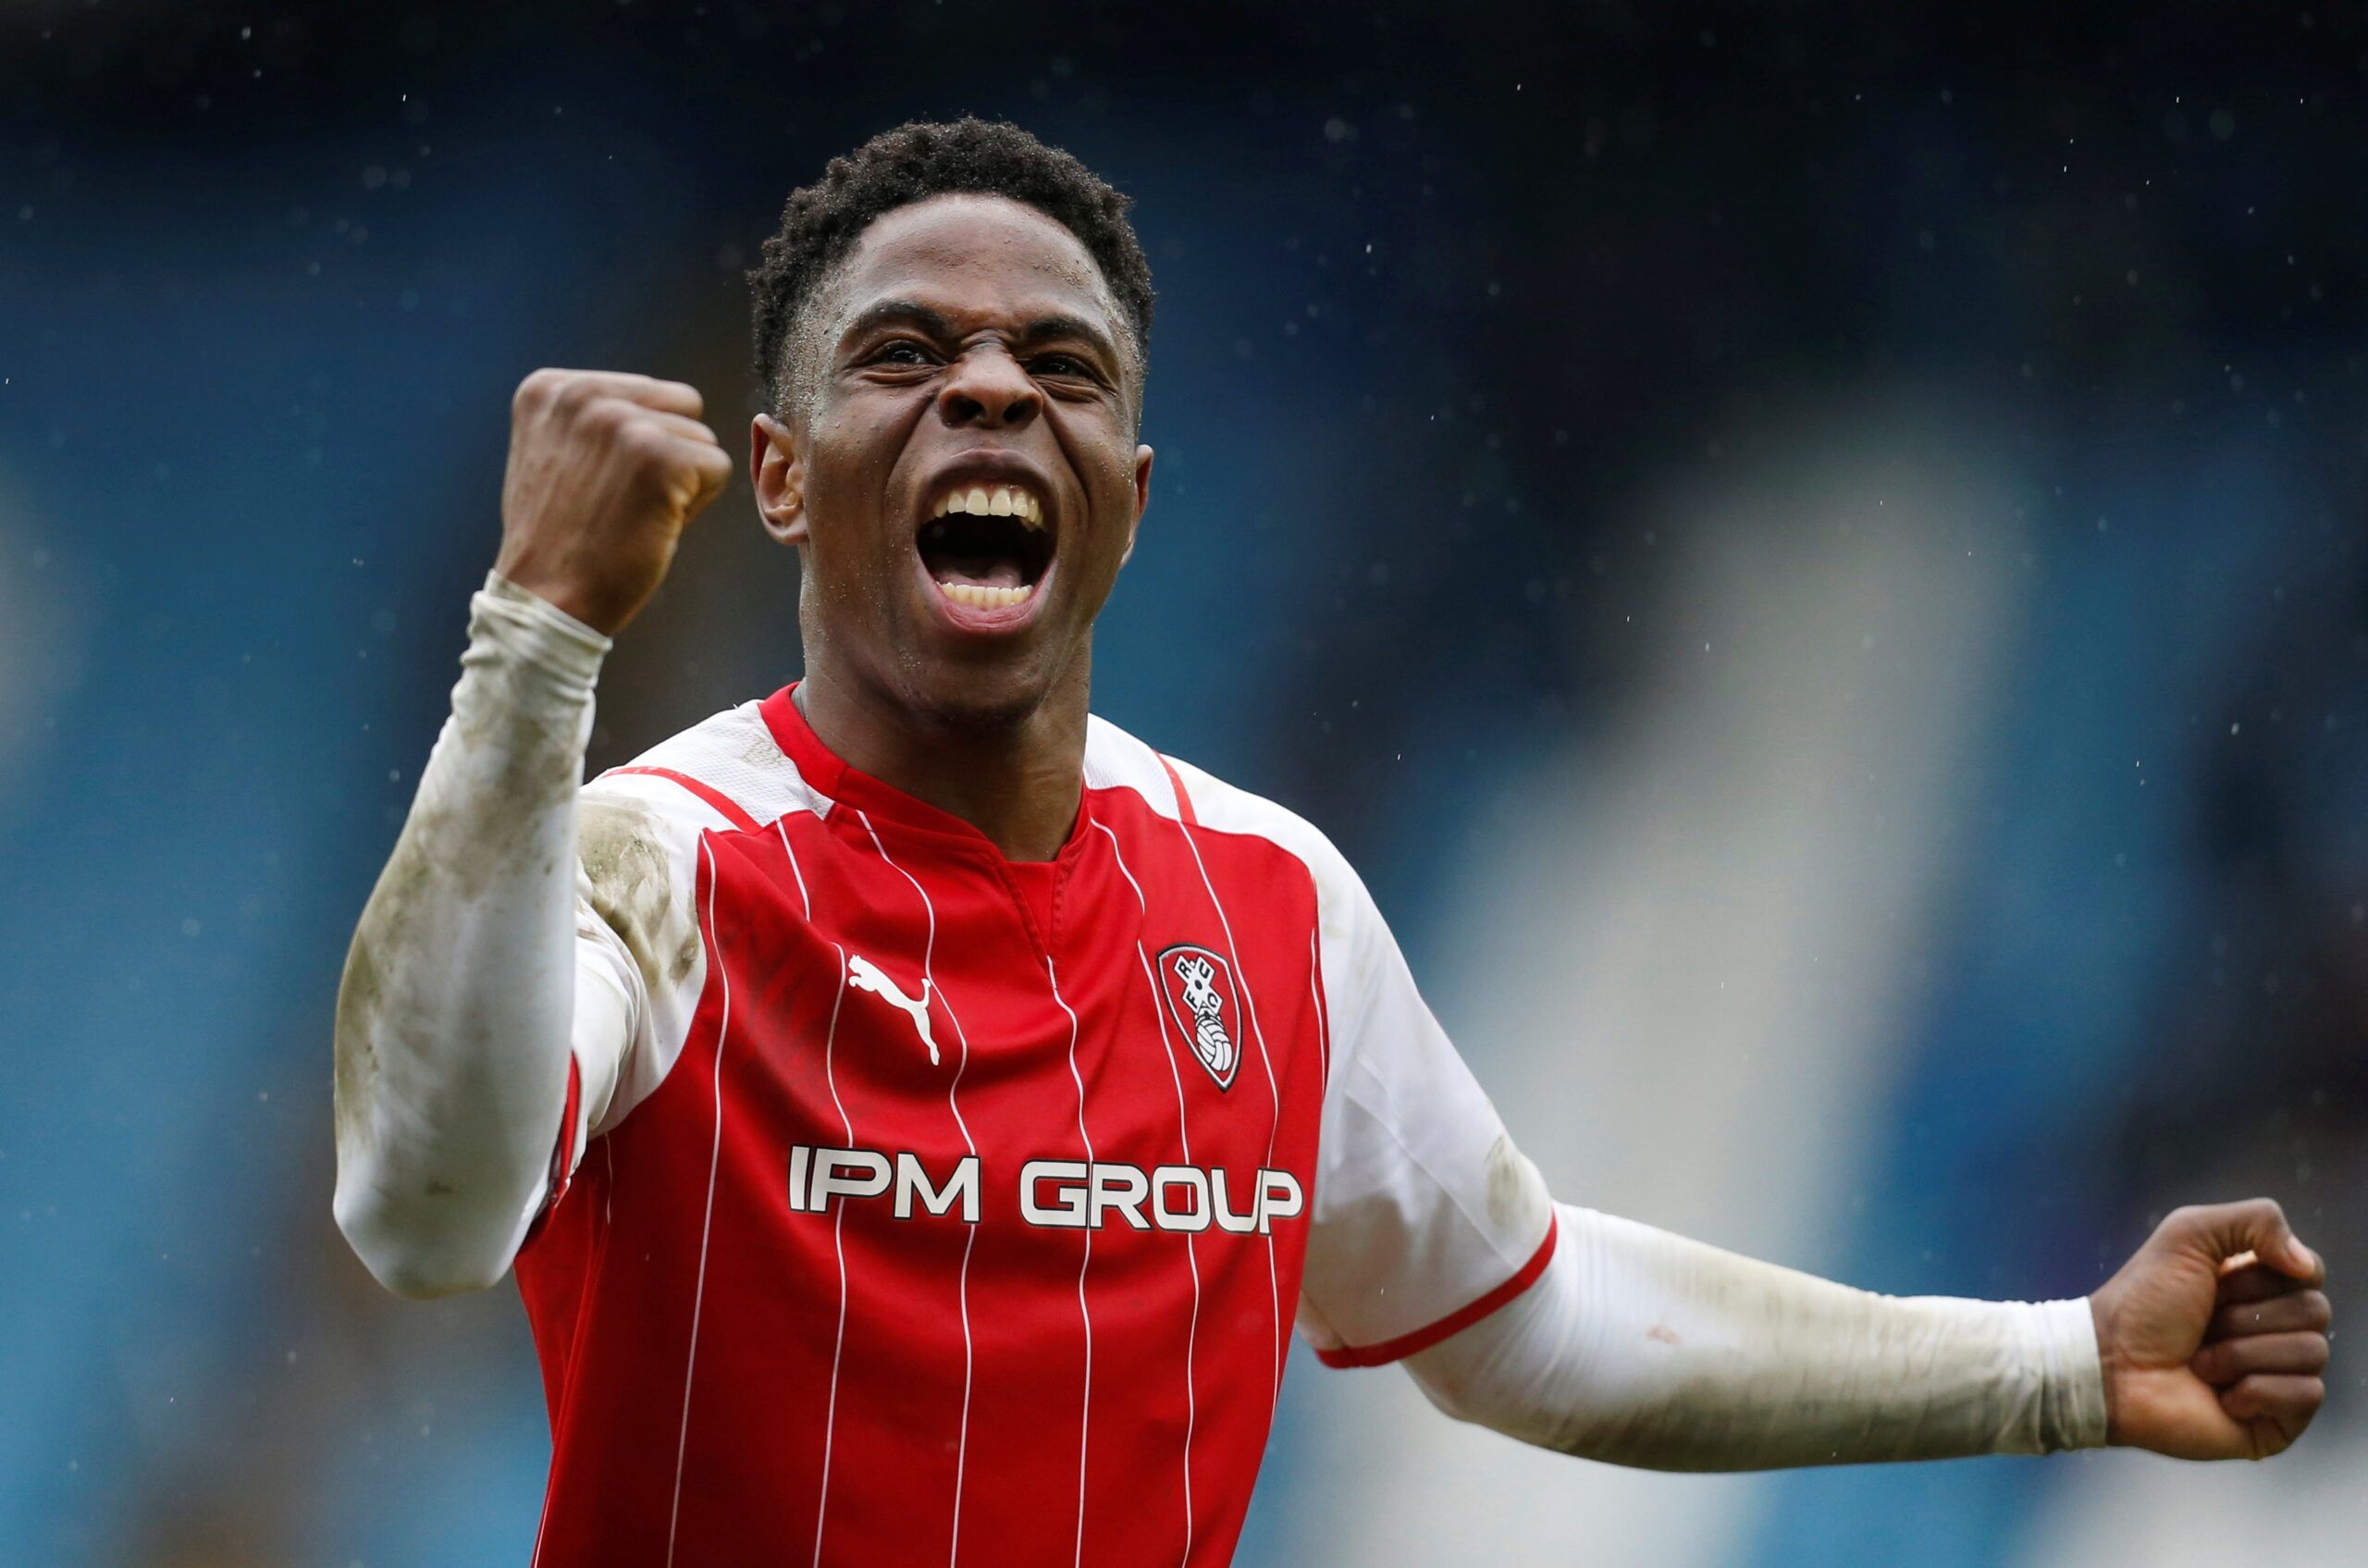 Soccer Football - League One - Sheffield Wednesday v Rotherham United - Hillsborough Stadium, Sheffield, Britain - February 13, 2022  Rotherham United's Chiedozie Ogbene celebrates after the match  Action Images/Ed Sykes  EDITORIAL USE ONLY. No use with unauthorized audio, video, data, fixture lists, club/league logos or 